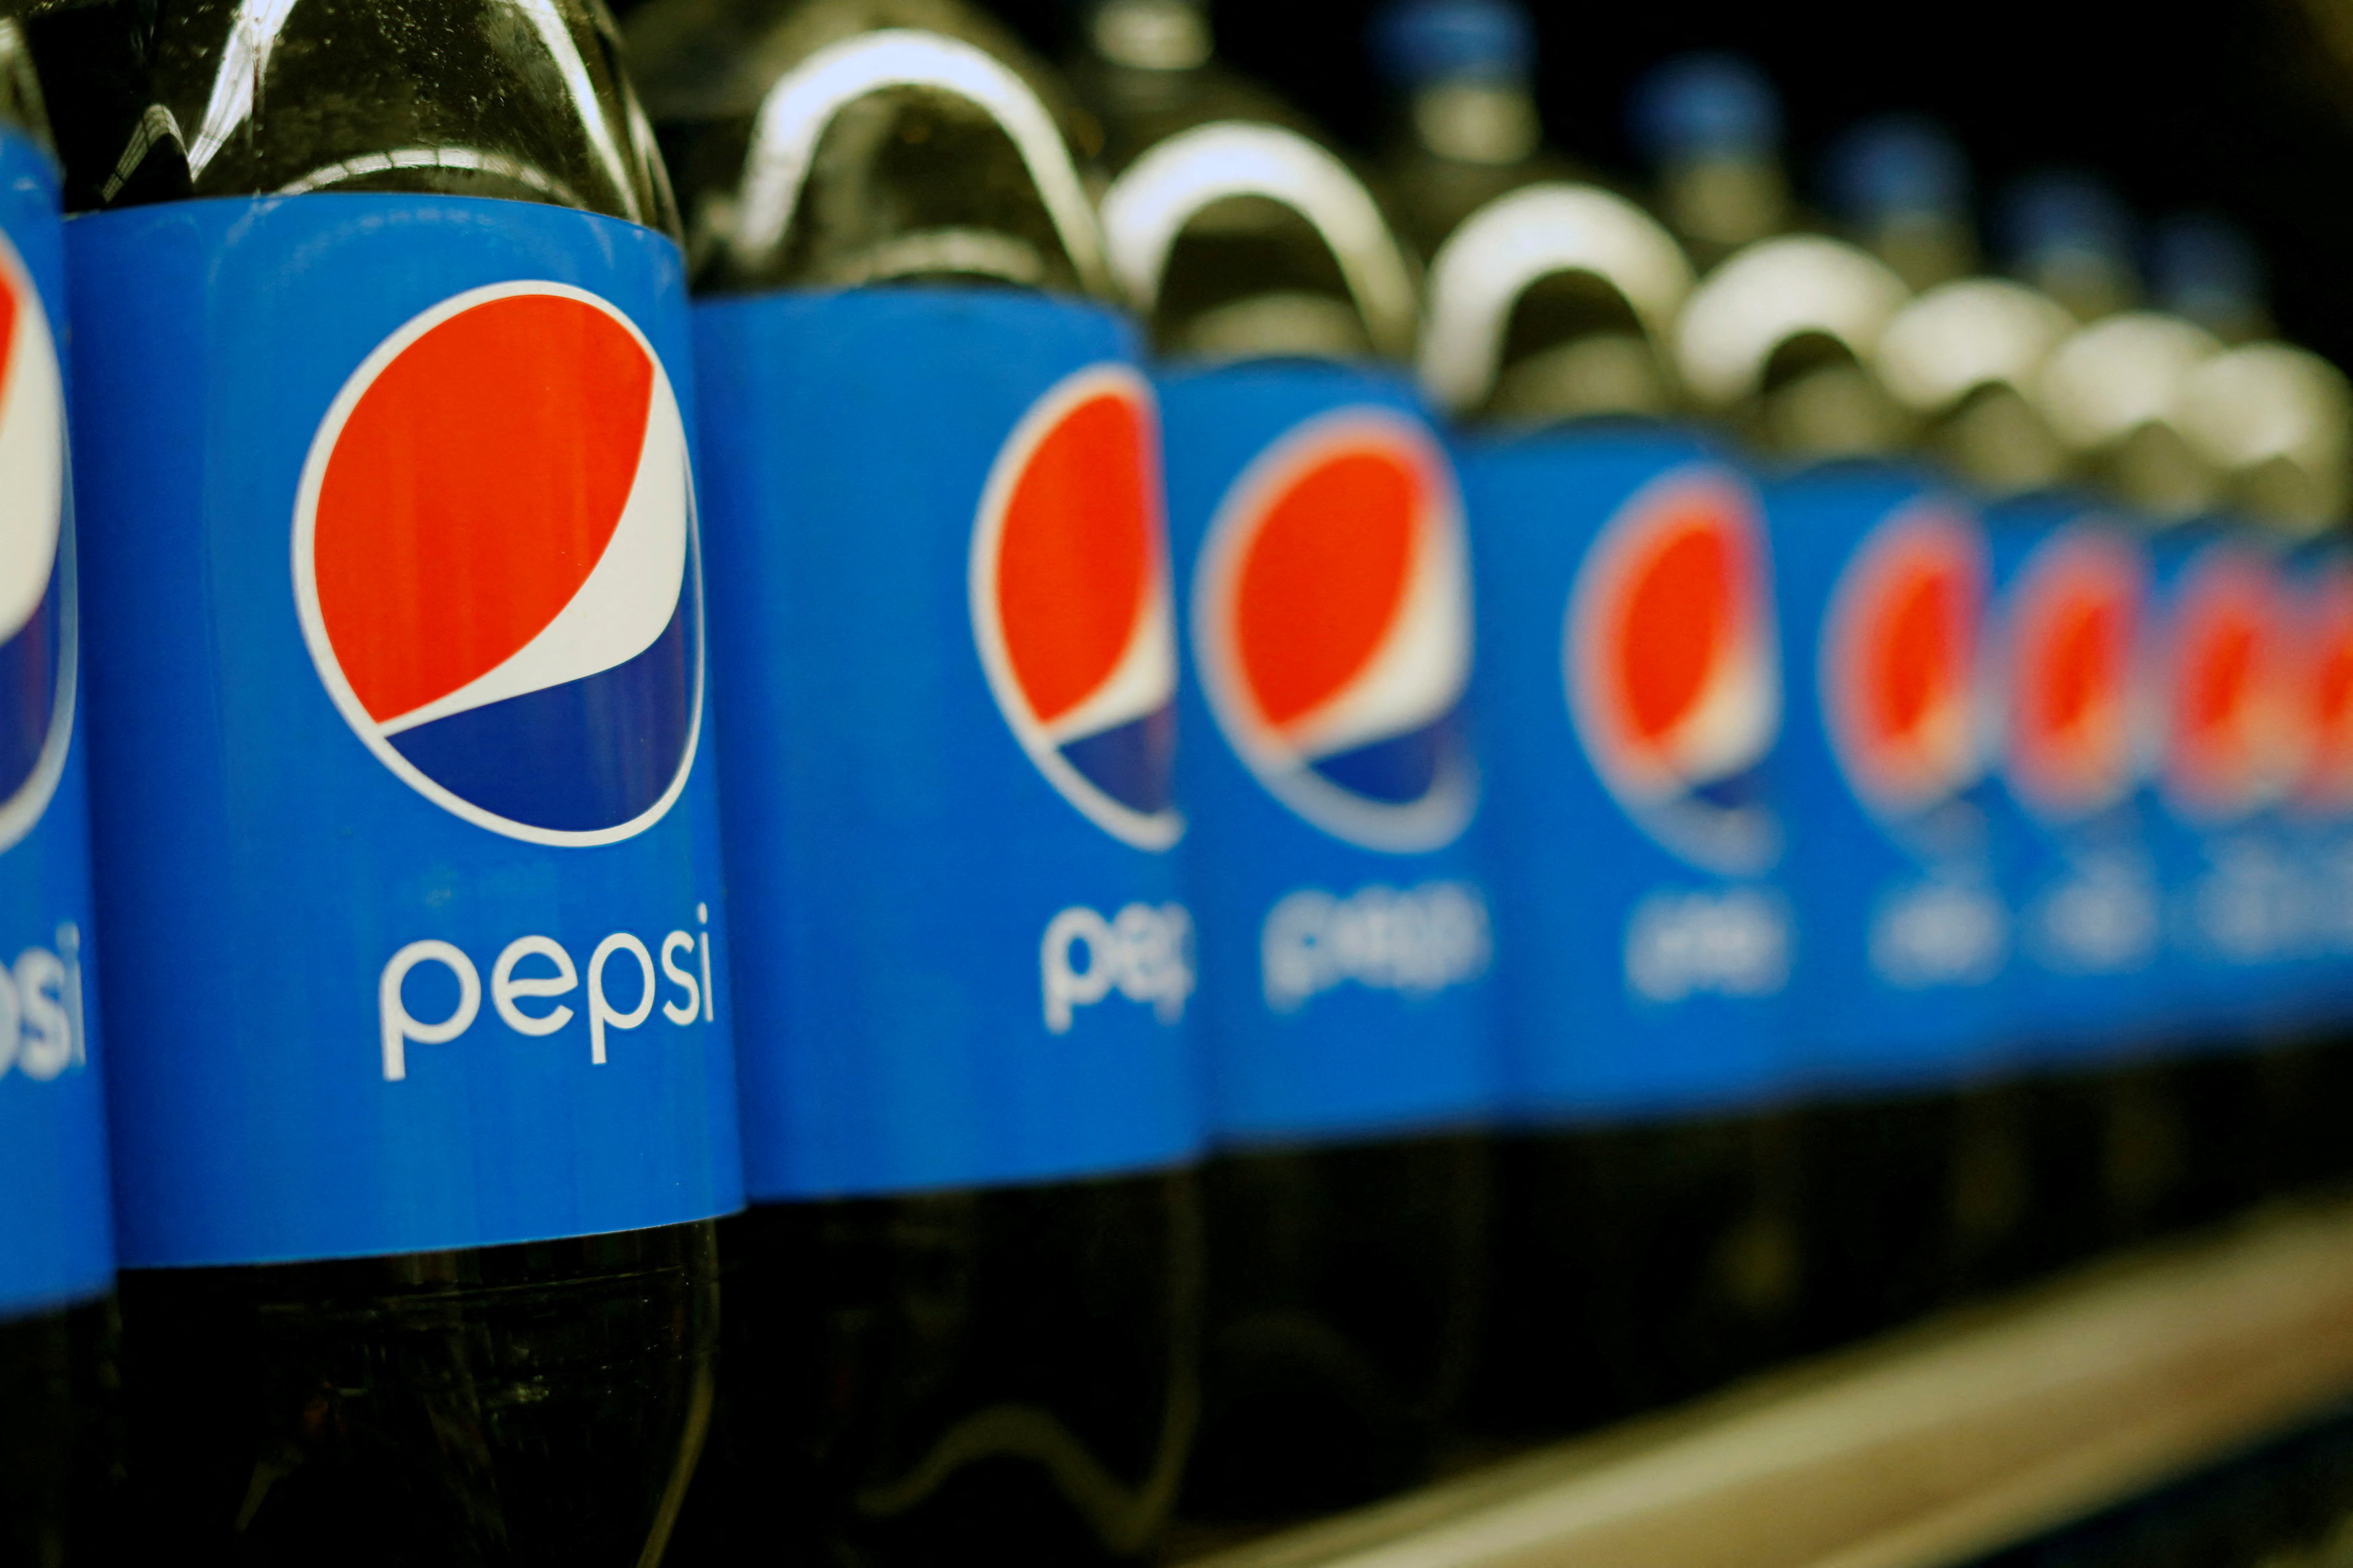 Bottles of Pepsi are pictured at a grocery store in Pasadena